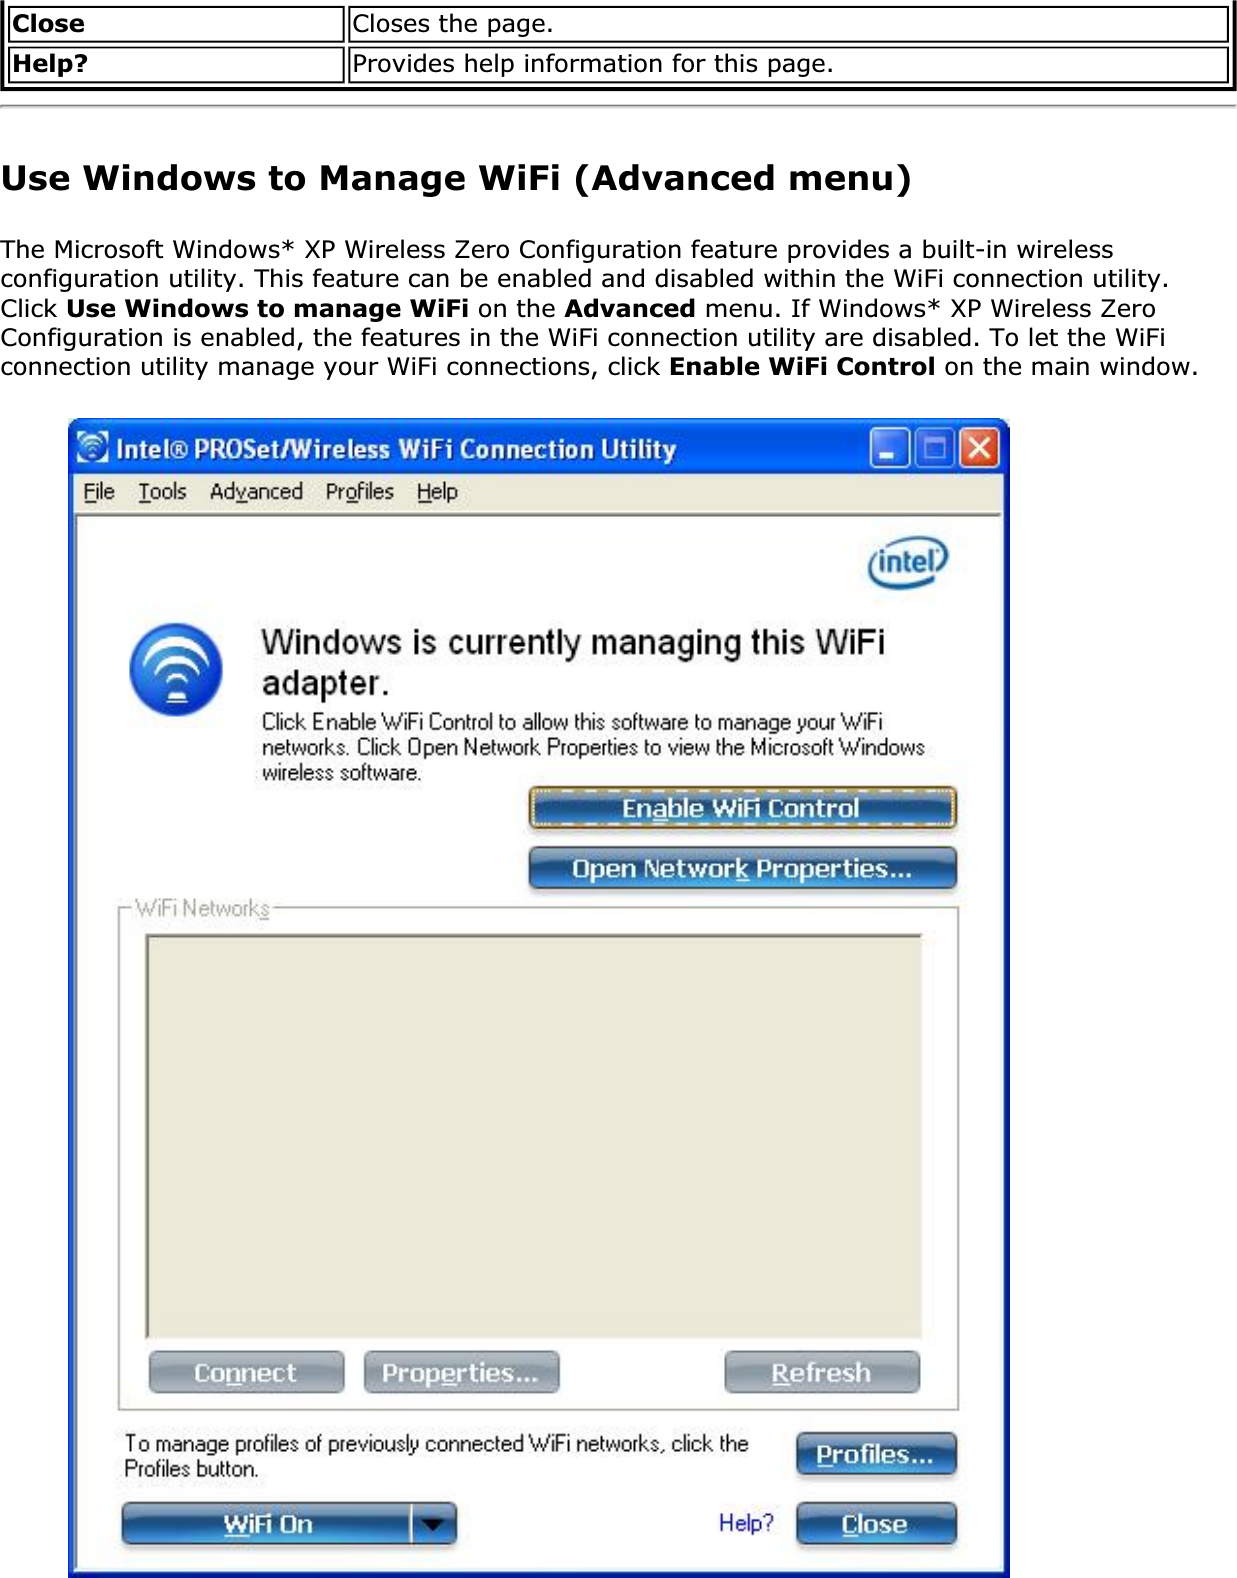 Close Closes the page.Help? Provides help information for this page.Use Windows to Manage WiFi (Advanced menu)The Microsoft Windows* XP Wireless Zero Configuration feature provides a built-in wireless configuration utility. This feature can be enabled and disabled within the WiFi connection utility. Click Use Windows to manage WiFi on the Advanced menu. If Windows* XP Wireless Zero Configuration is enabled, the features in the WiFi connection utility are disabled. To let the WiFi connection utility manage your WiFi connections, click Enable WiFi Control on the main window.